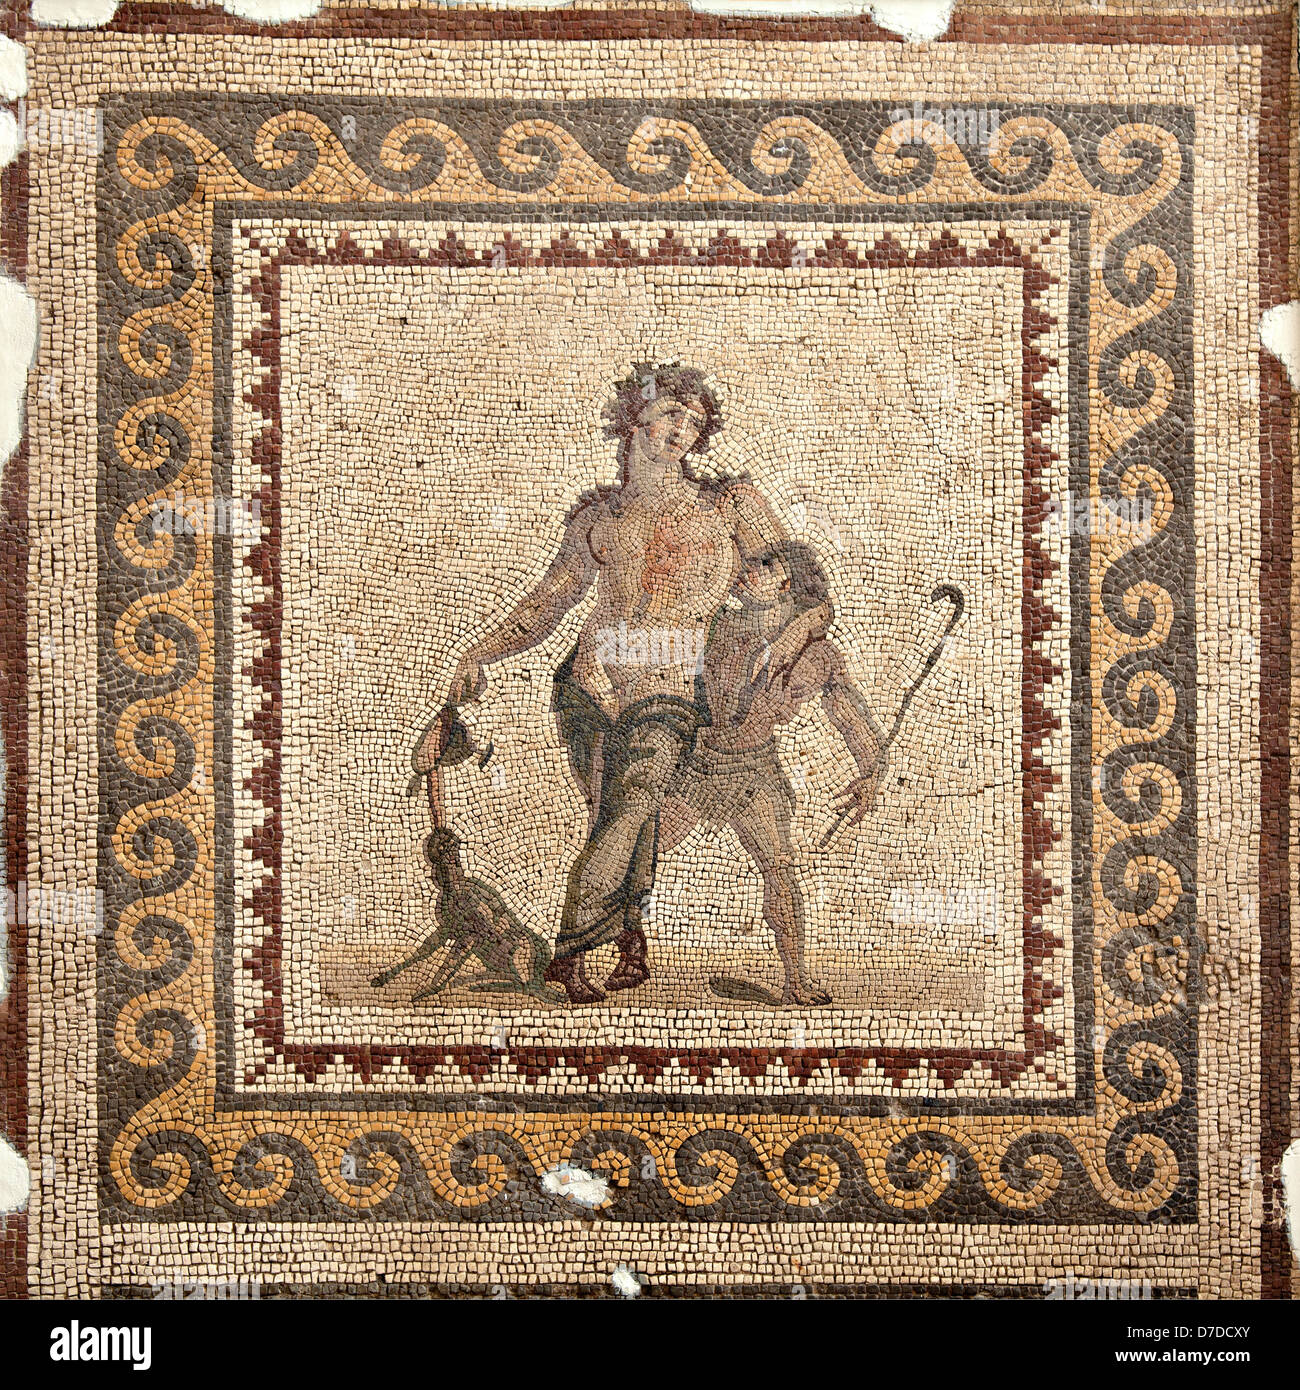 The Drunken Dionysus from Antakya. 4th Cent. A.D. Stock Photo